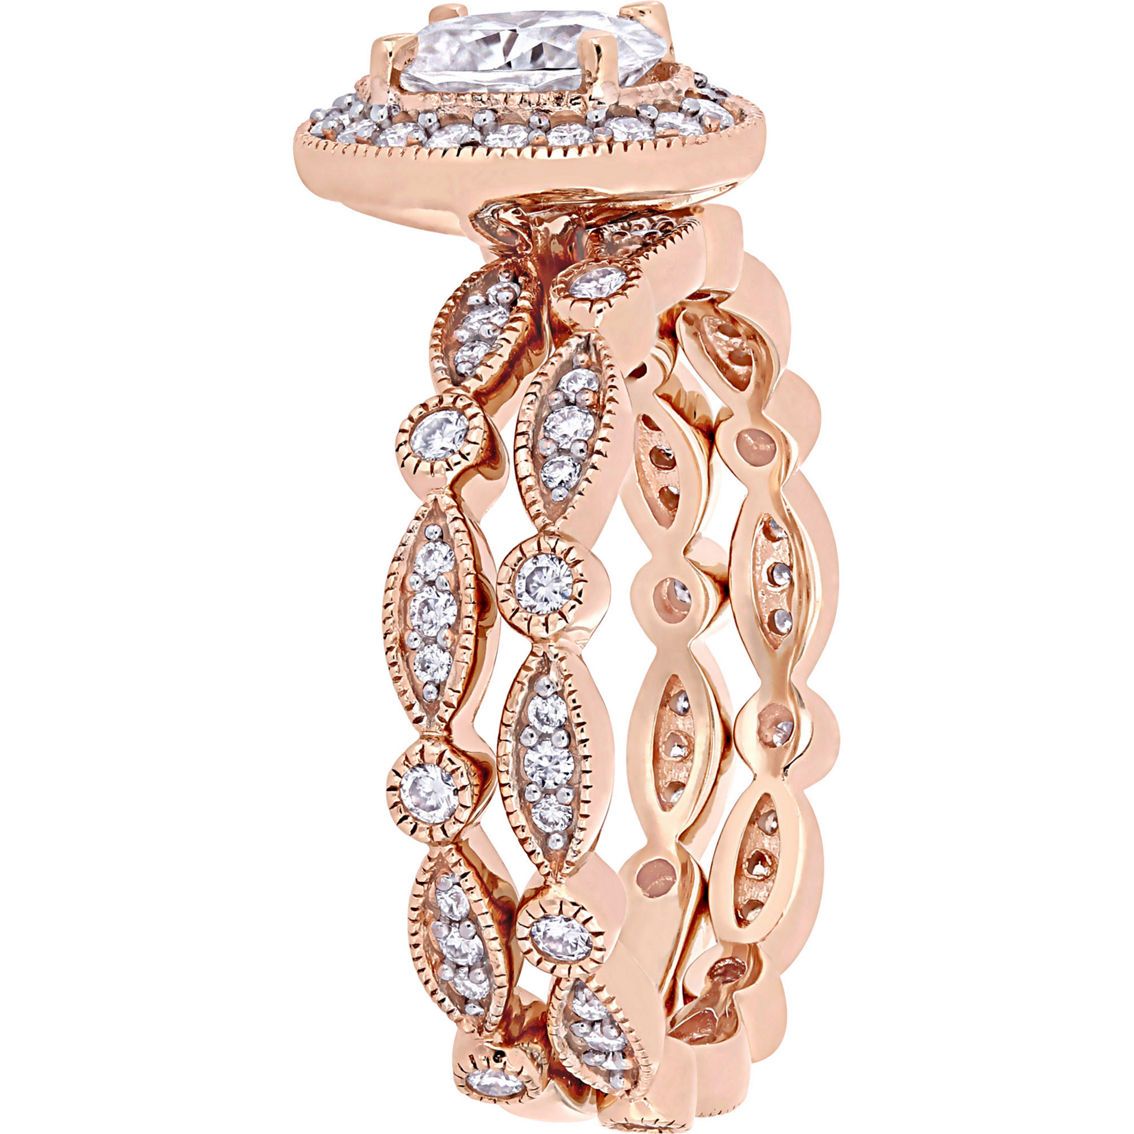 Sofia B. 10K Rose Gold 1 1/2 CTW Moissanite Oval Halo Infinity Engagement Ring - Image 2 of 5